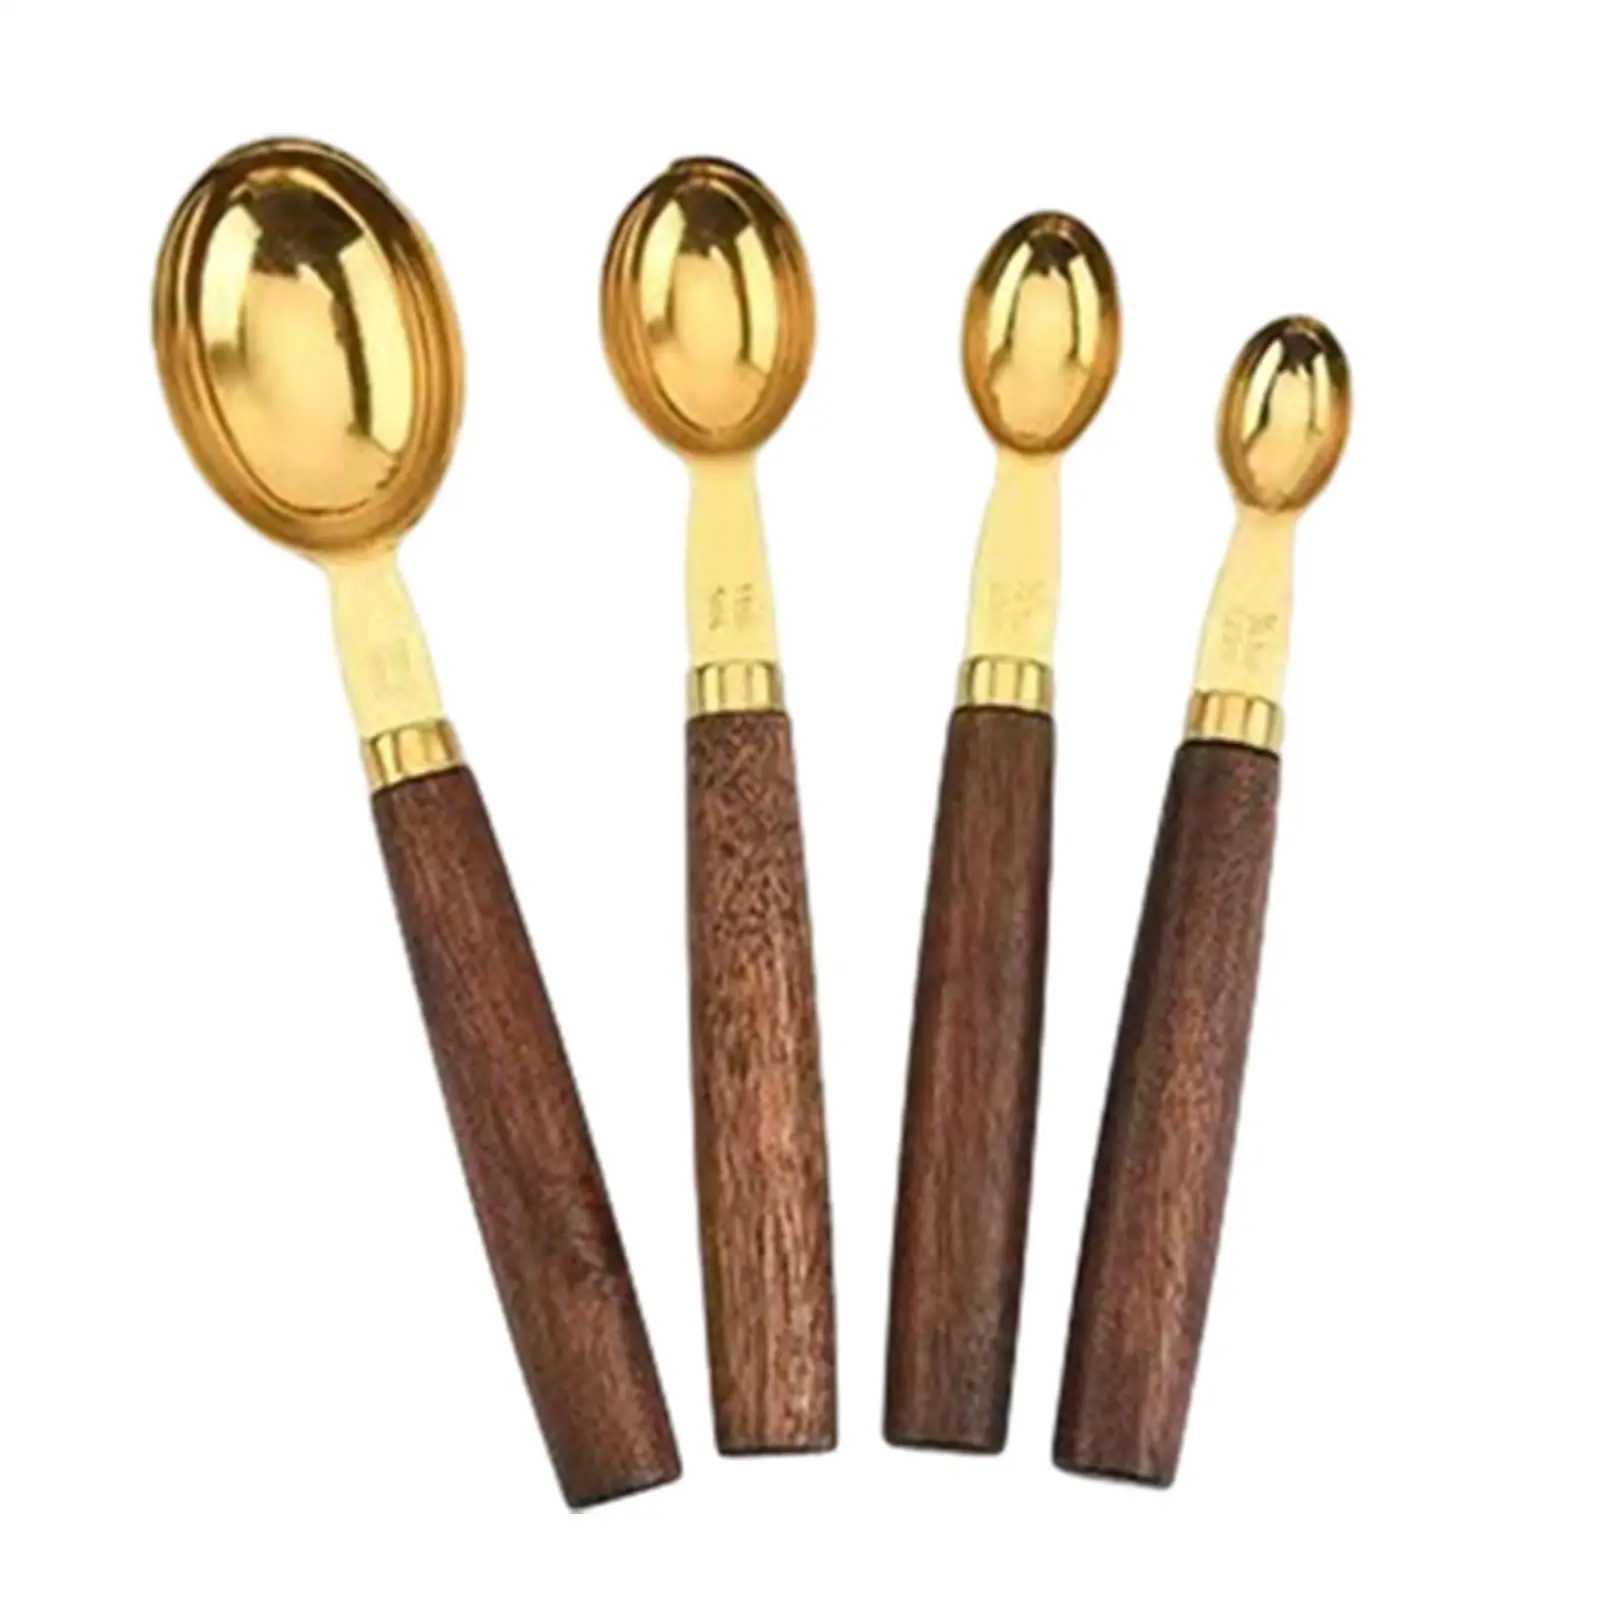 Measuring Cups Spoons Set, Measuring Baking Set, Stainless Steel Measuring Cups Stackable for Dry and Liquid Cooking Oil,